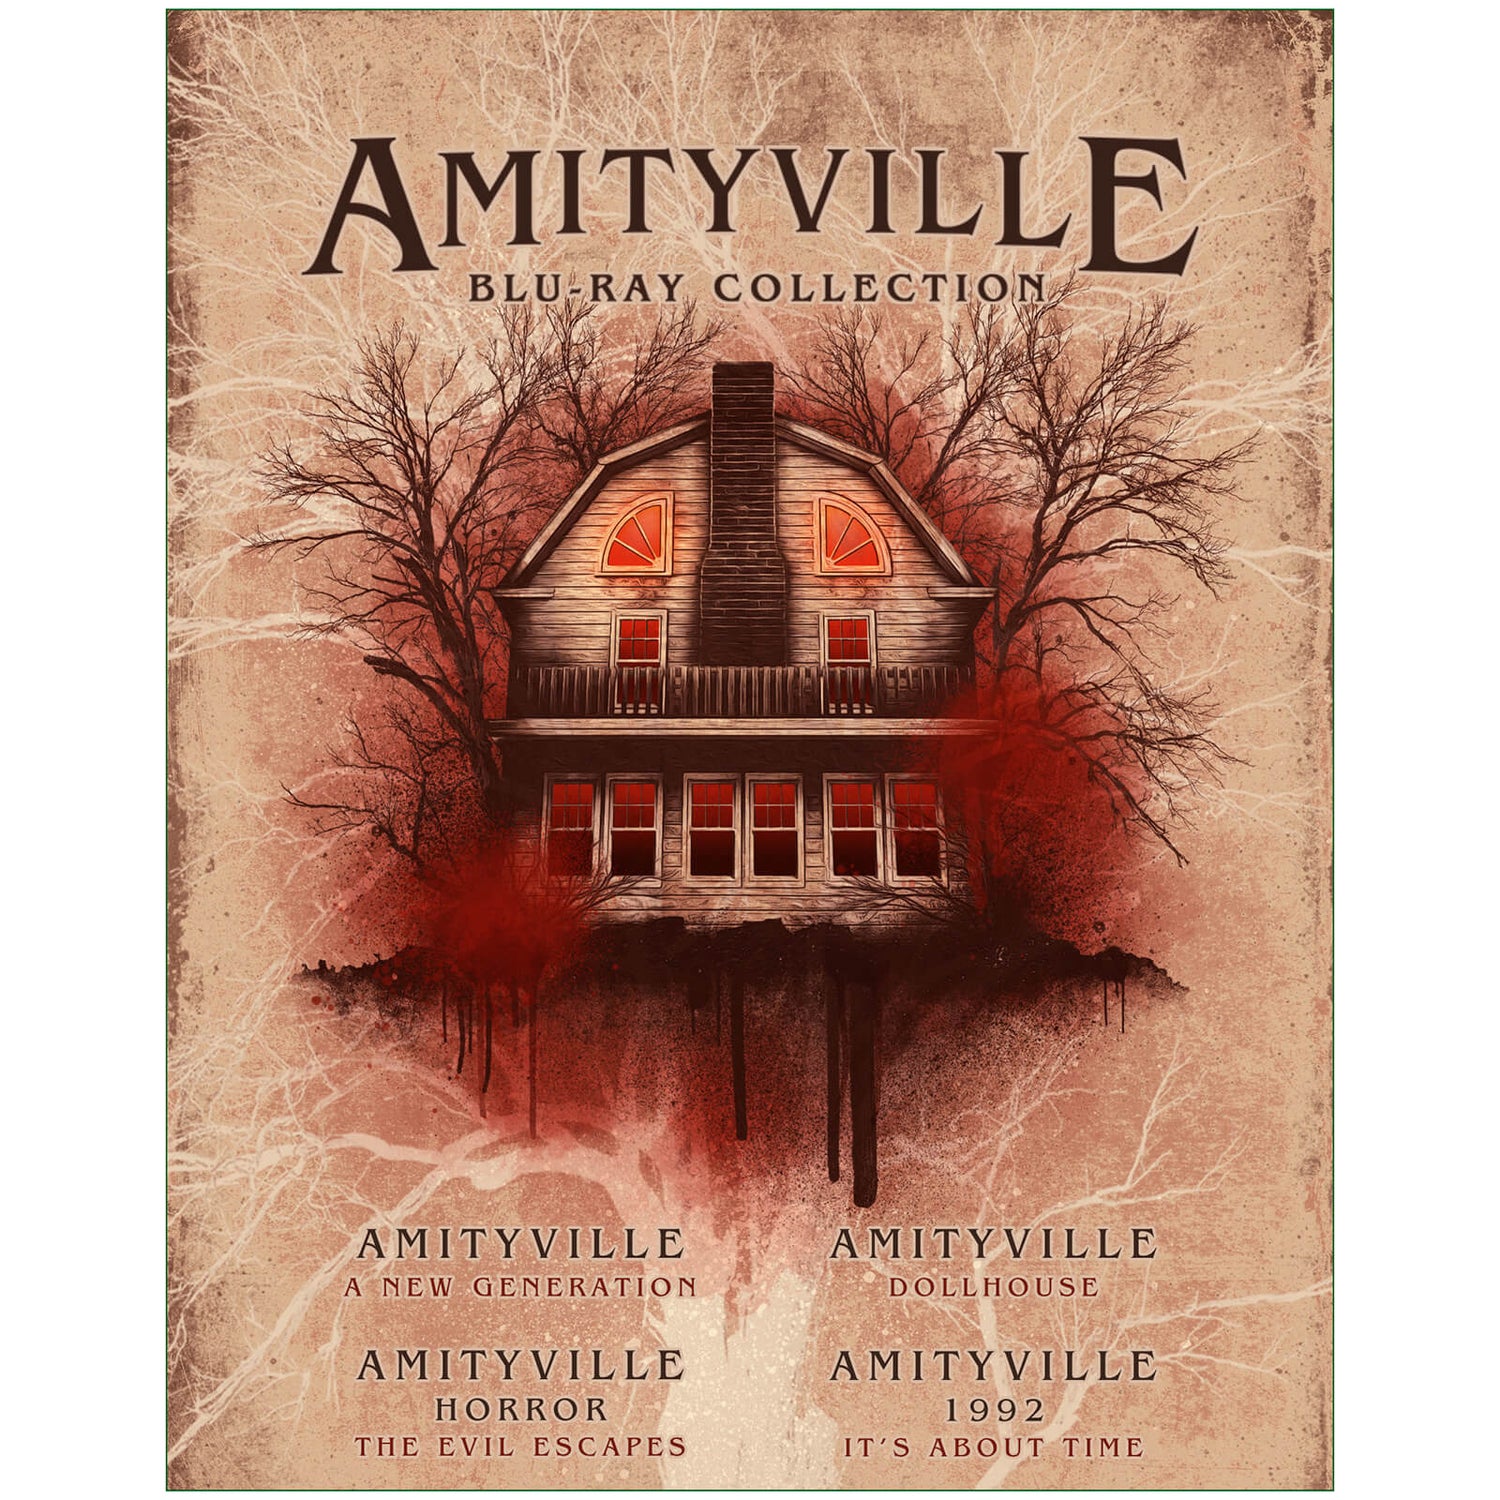 Amityville Blu-Ray Collection